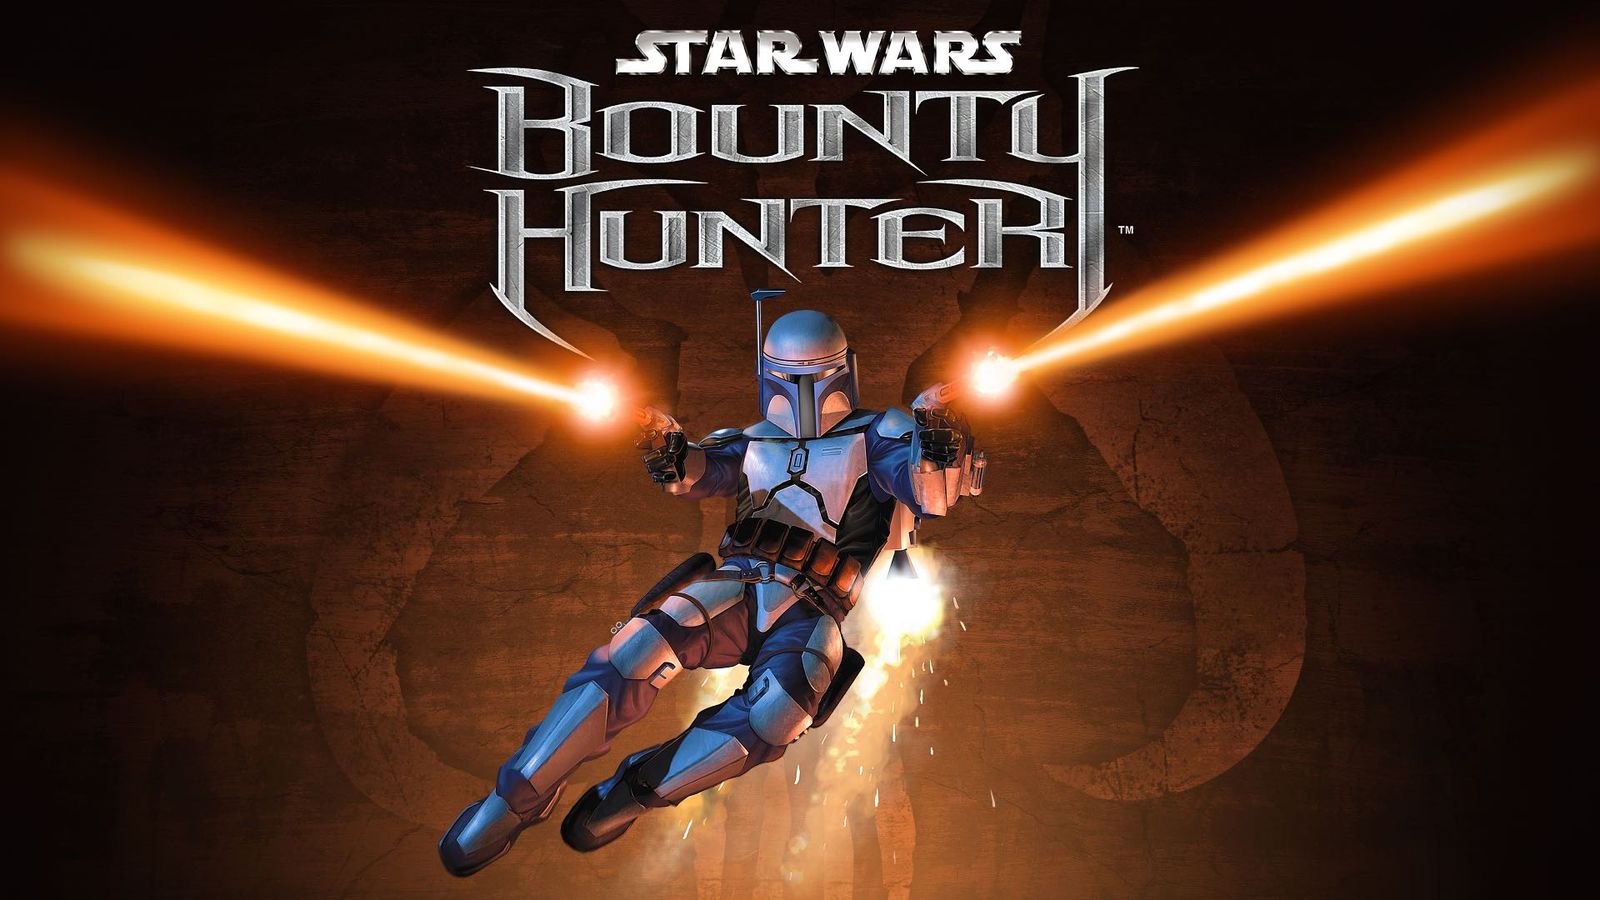 a poster for star wars bounty hunter with a man flying through the air holding two lightsabers .